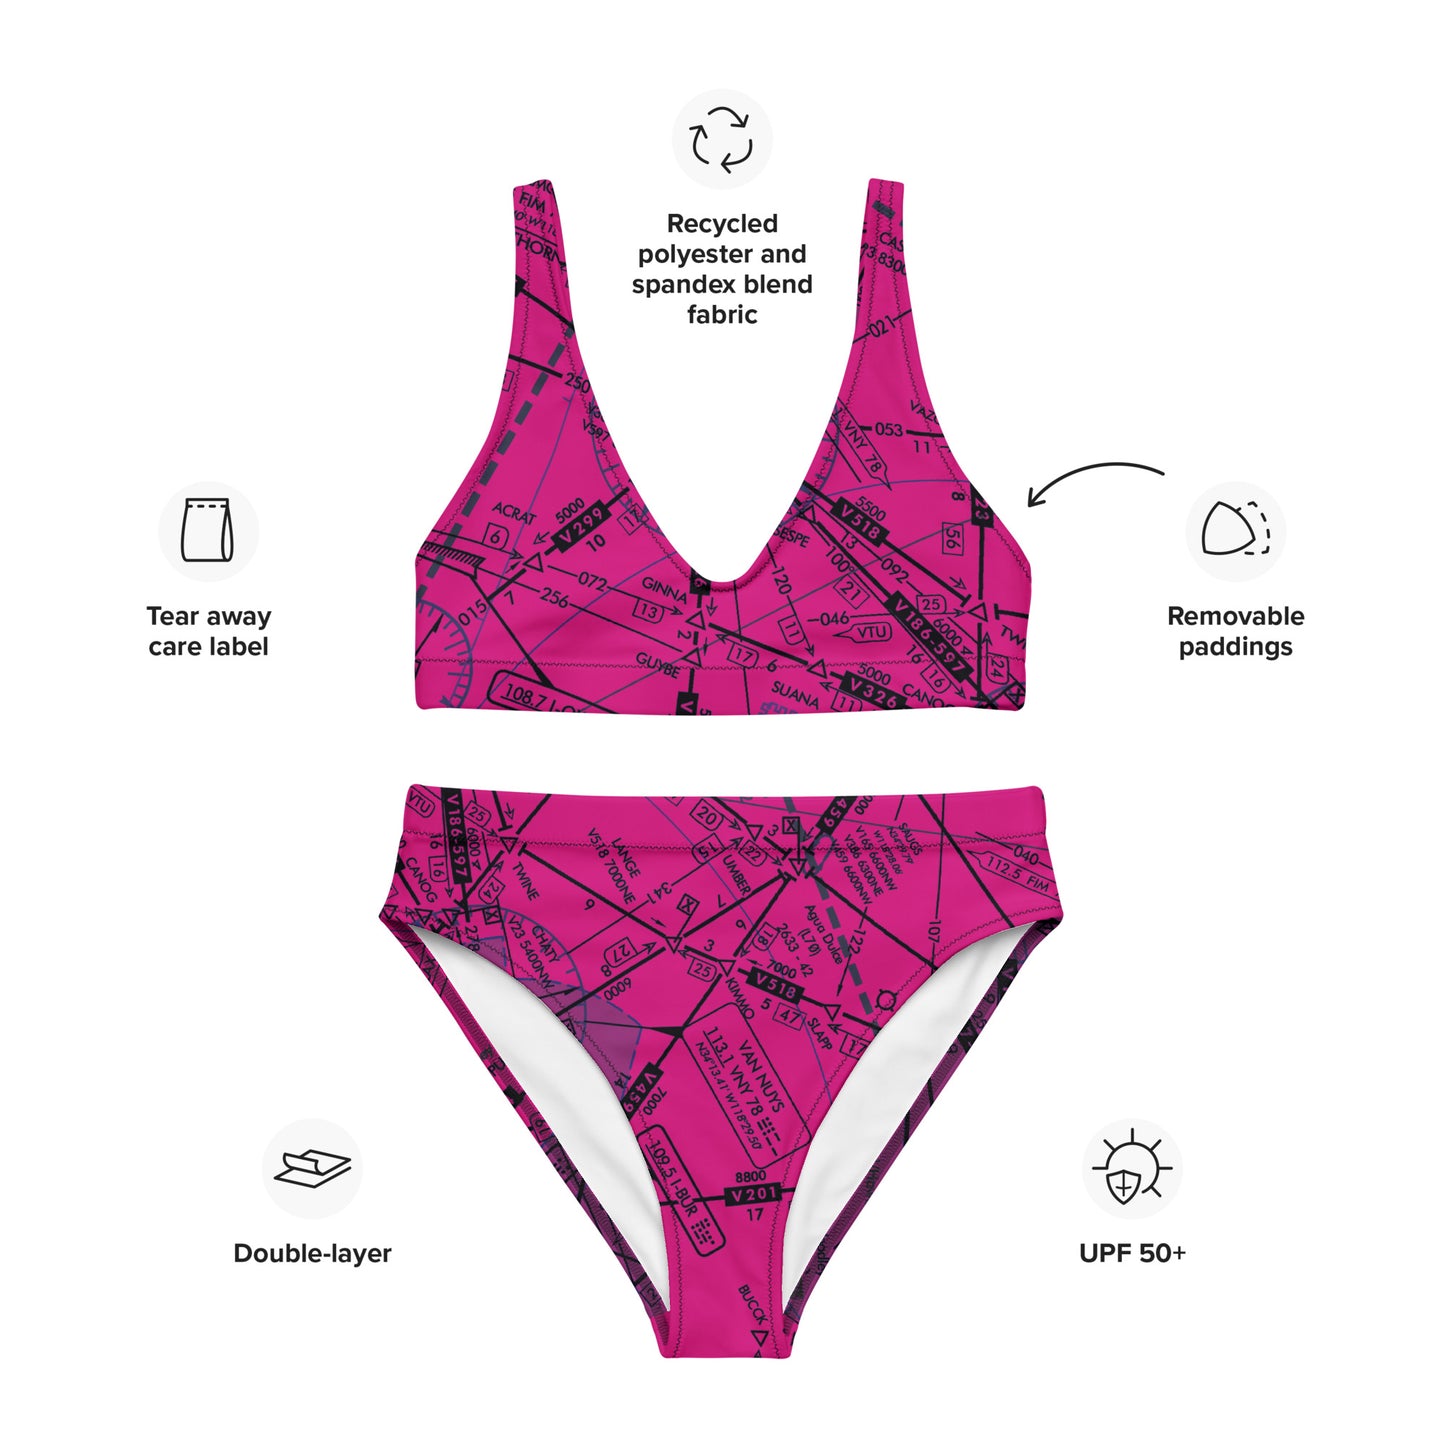 Enroute Low Altitude Chart recycled high-waisted bikini (pink)